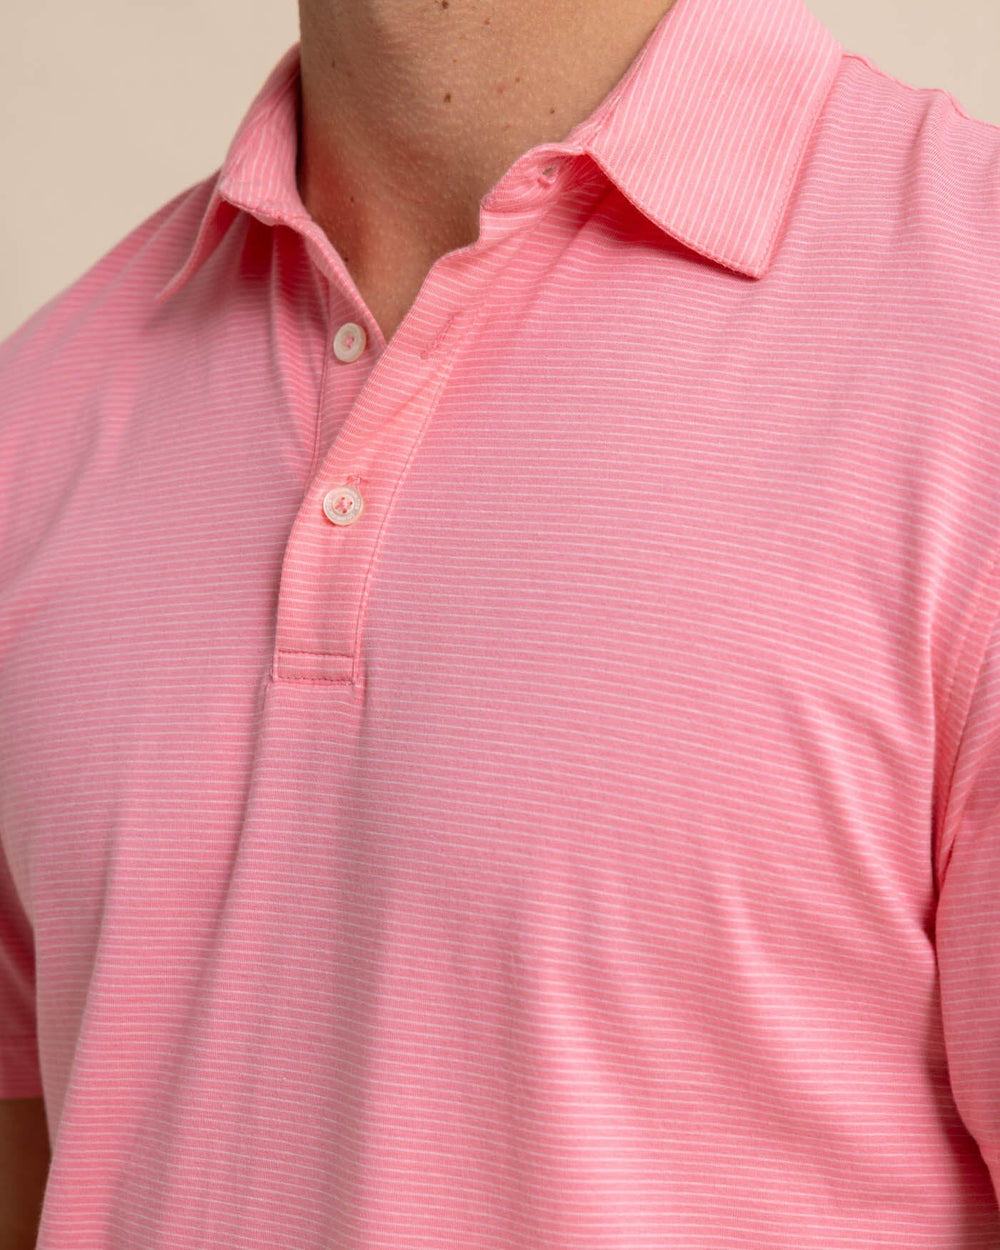 The detail view of the Southern Tide The Seaport Davenport Stripe Polo by Southern Tide - Geranium Pink